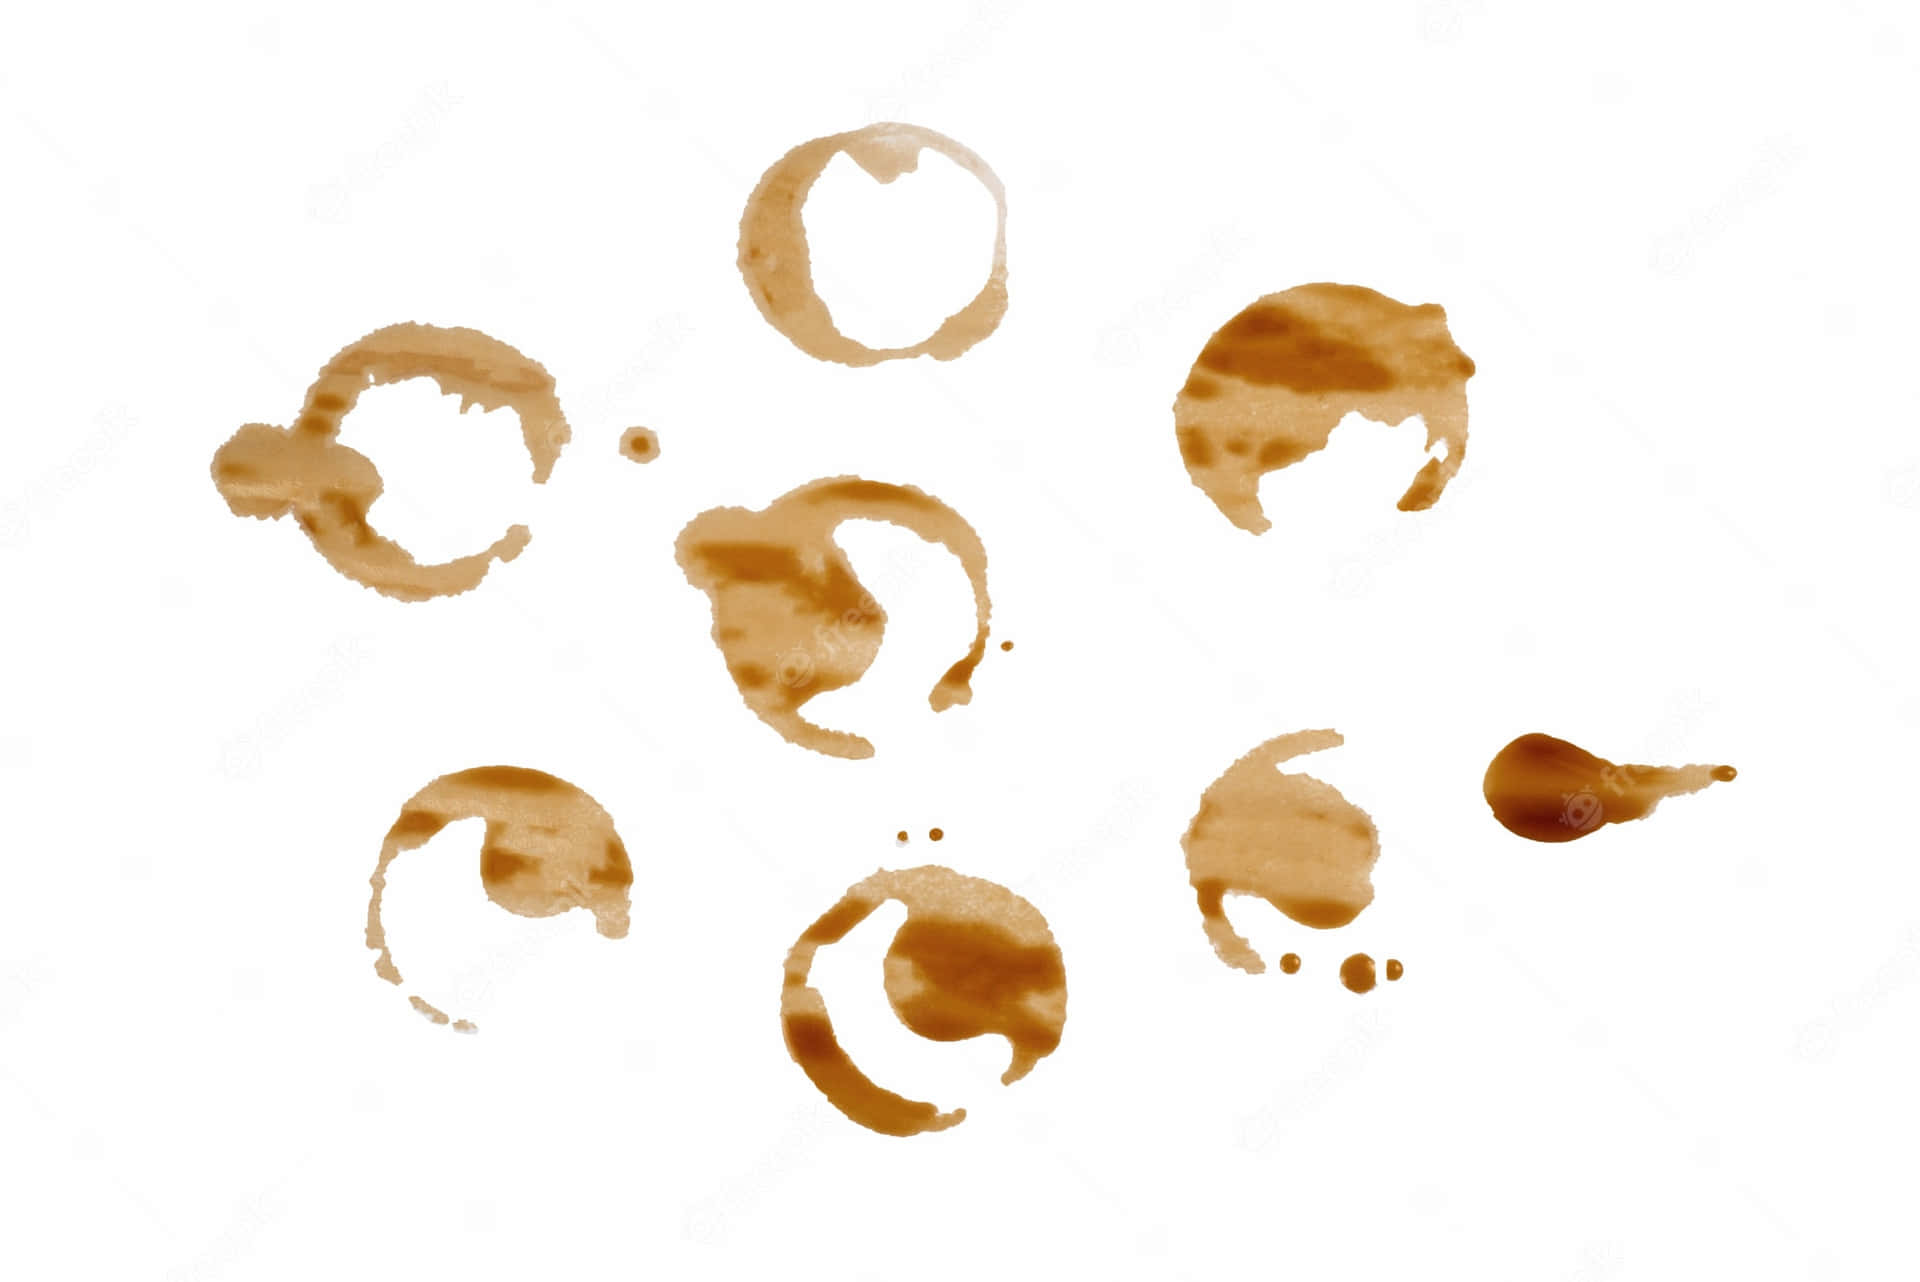 Fortuitous Coffee Stain Wallpaper